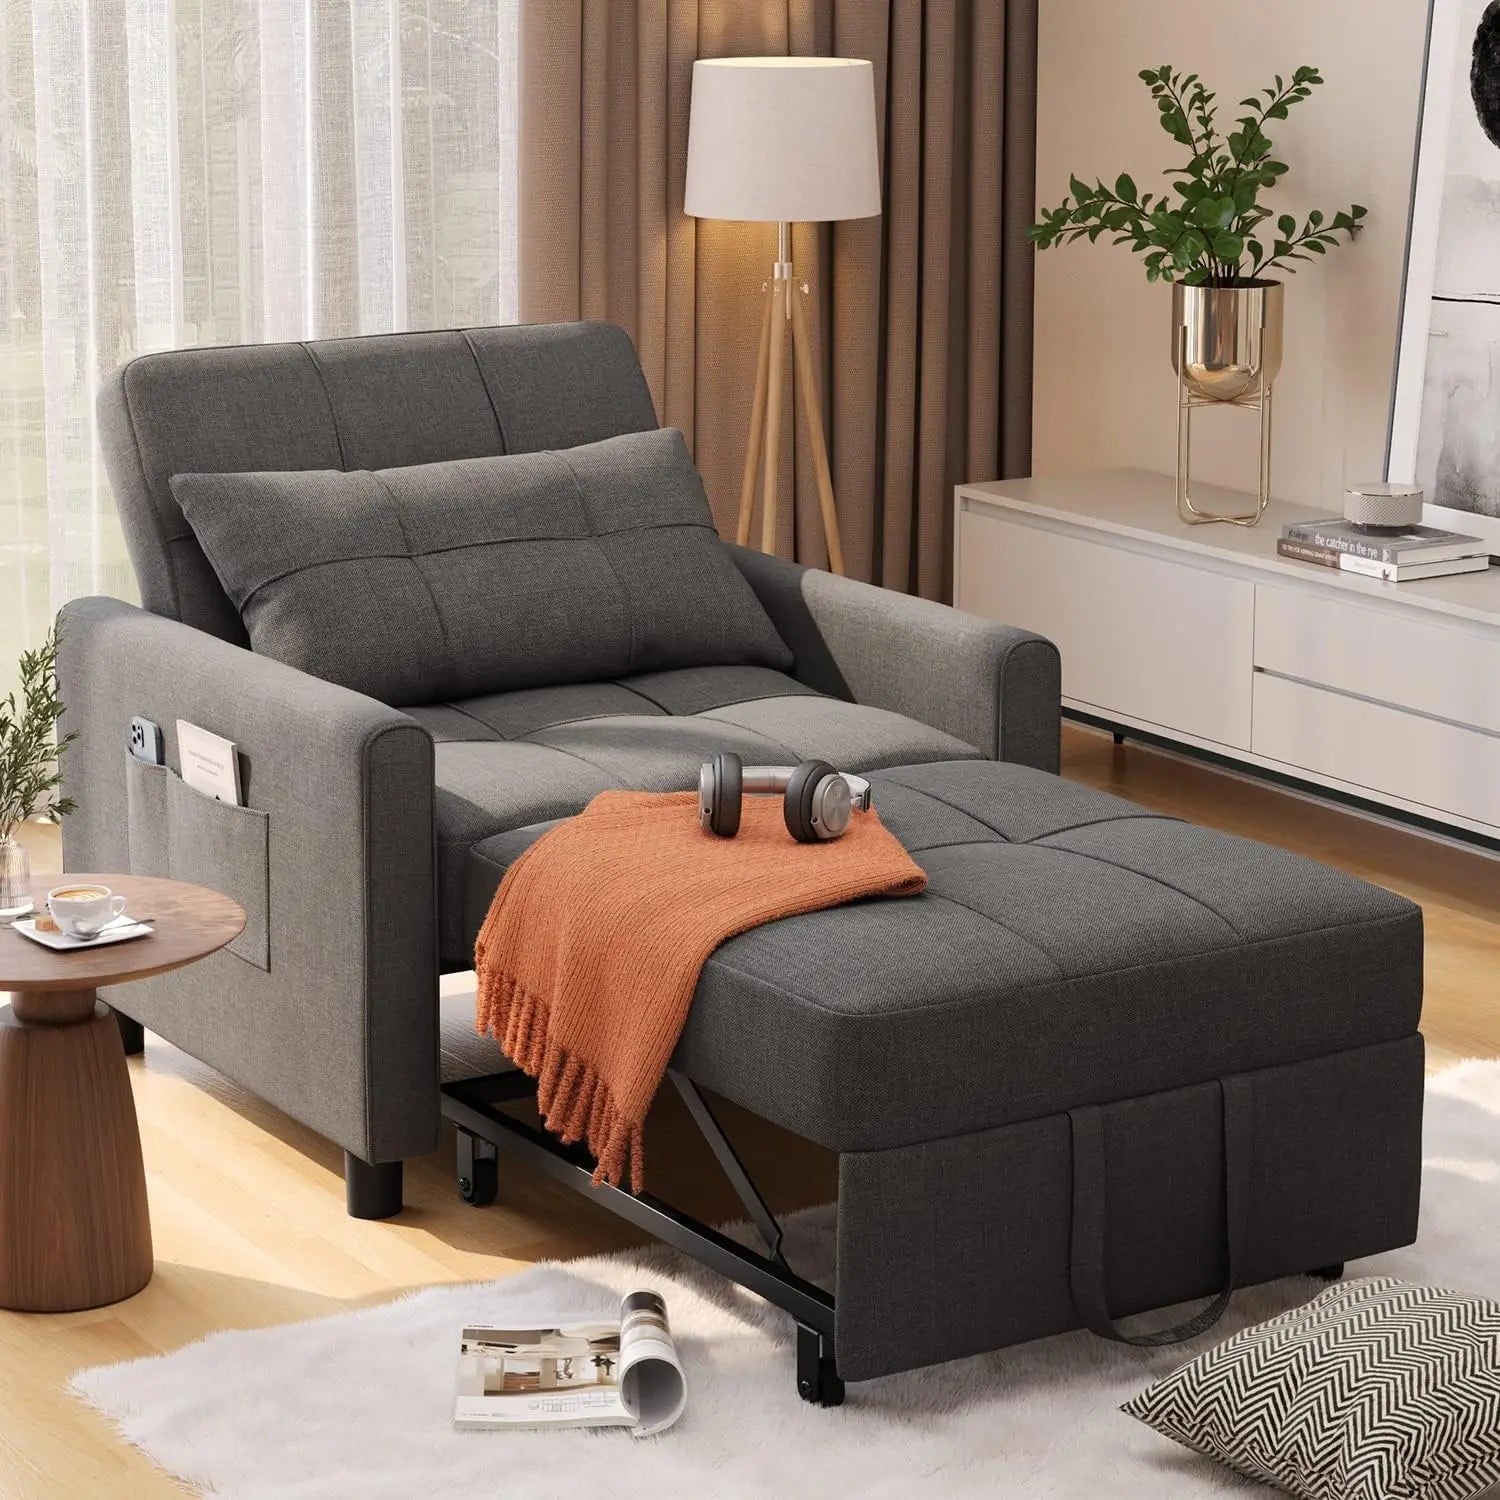 Adjustable Sleeper Chair Pullout Sofa Bed - Easier Life Emporium